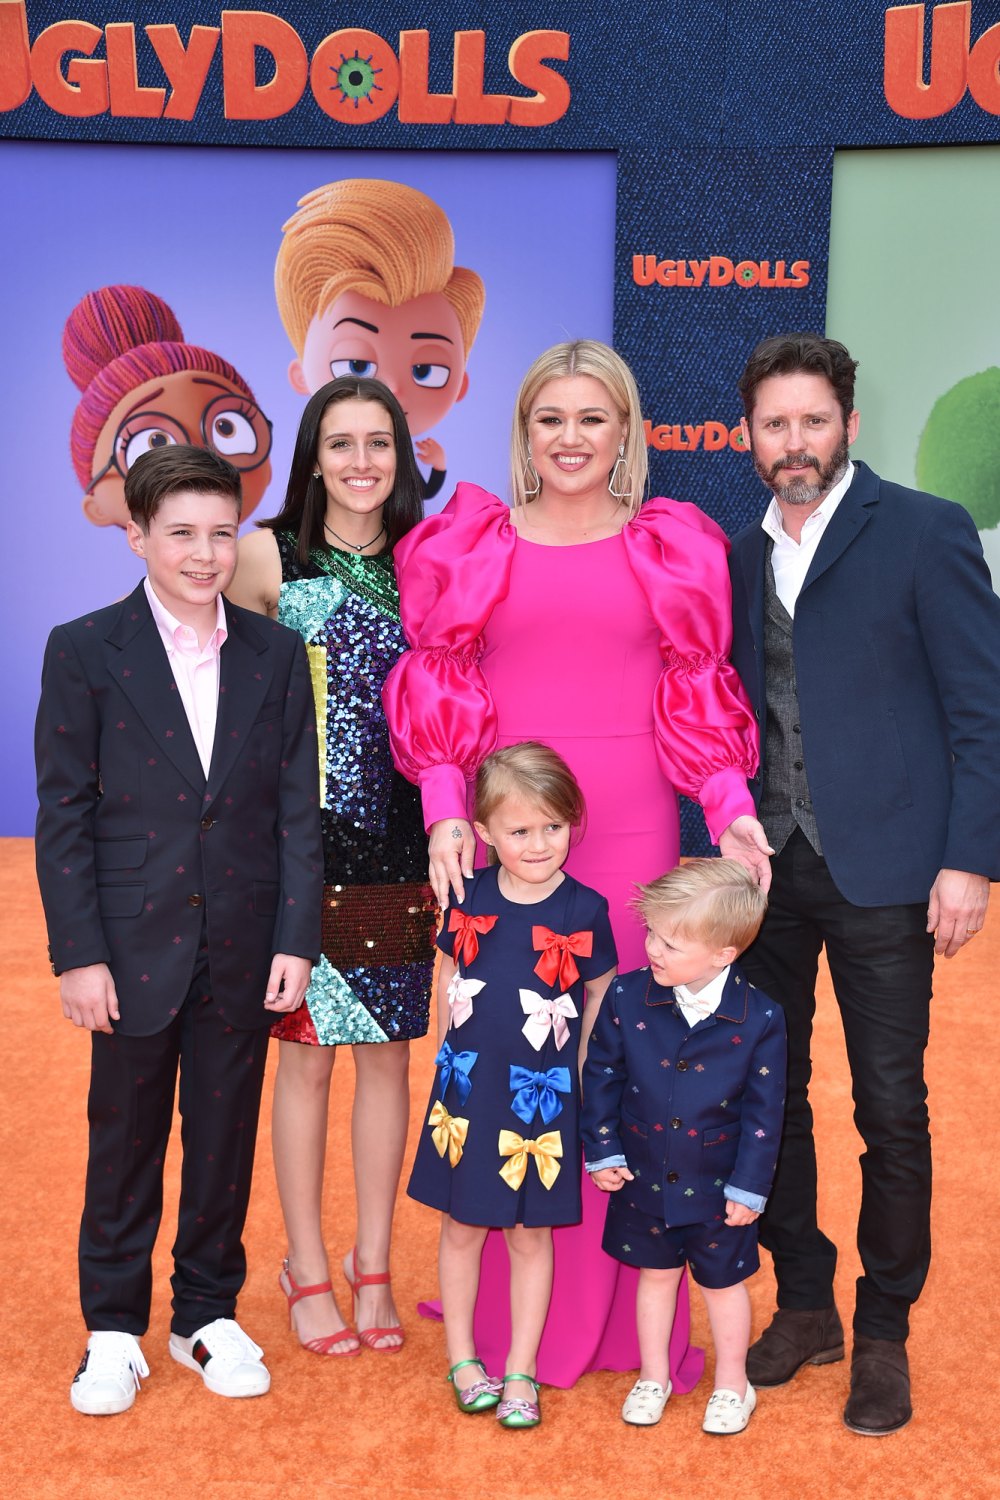 Kelly Clarkson Says Her Kids With Brandon Blackstock Tell Her They’re ‘Really Sad’ About the Divorce